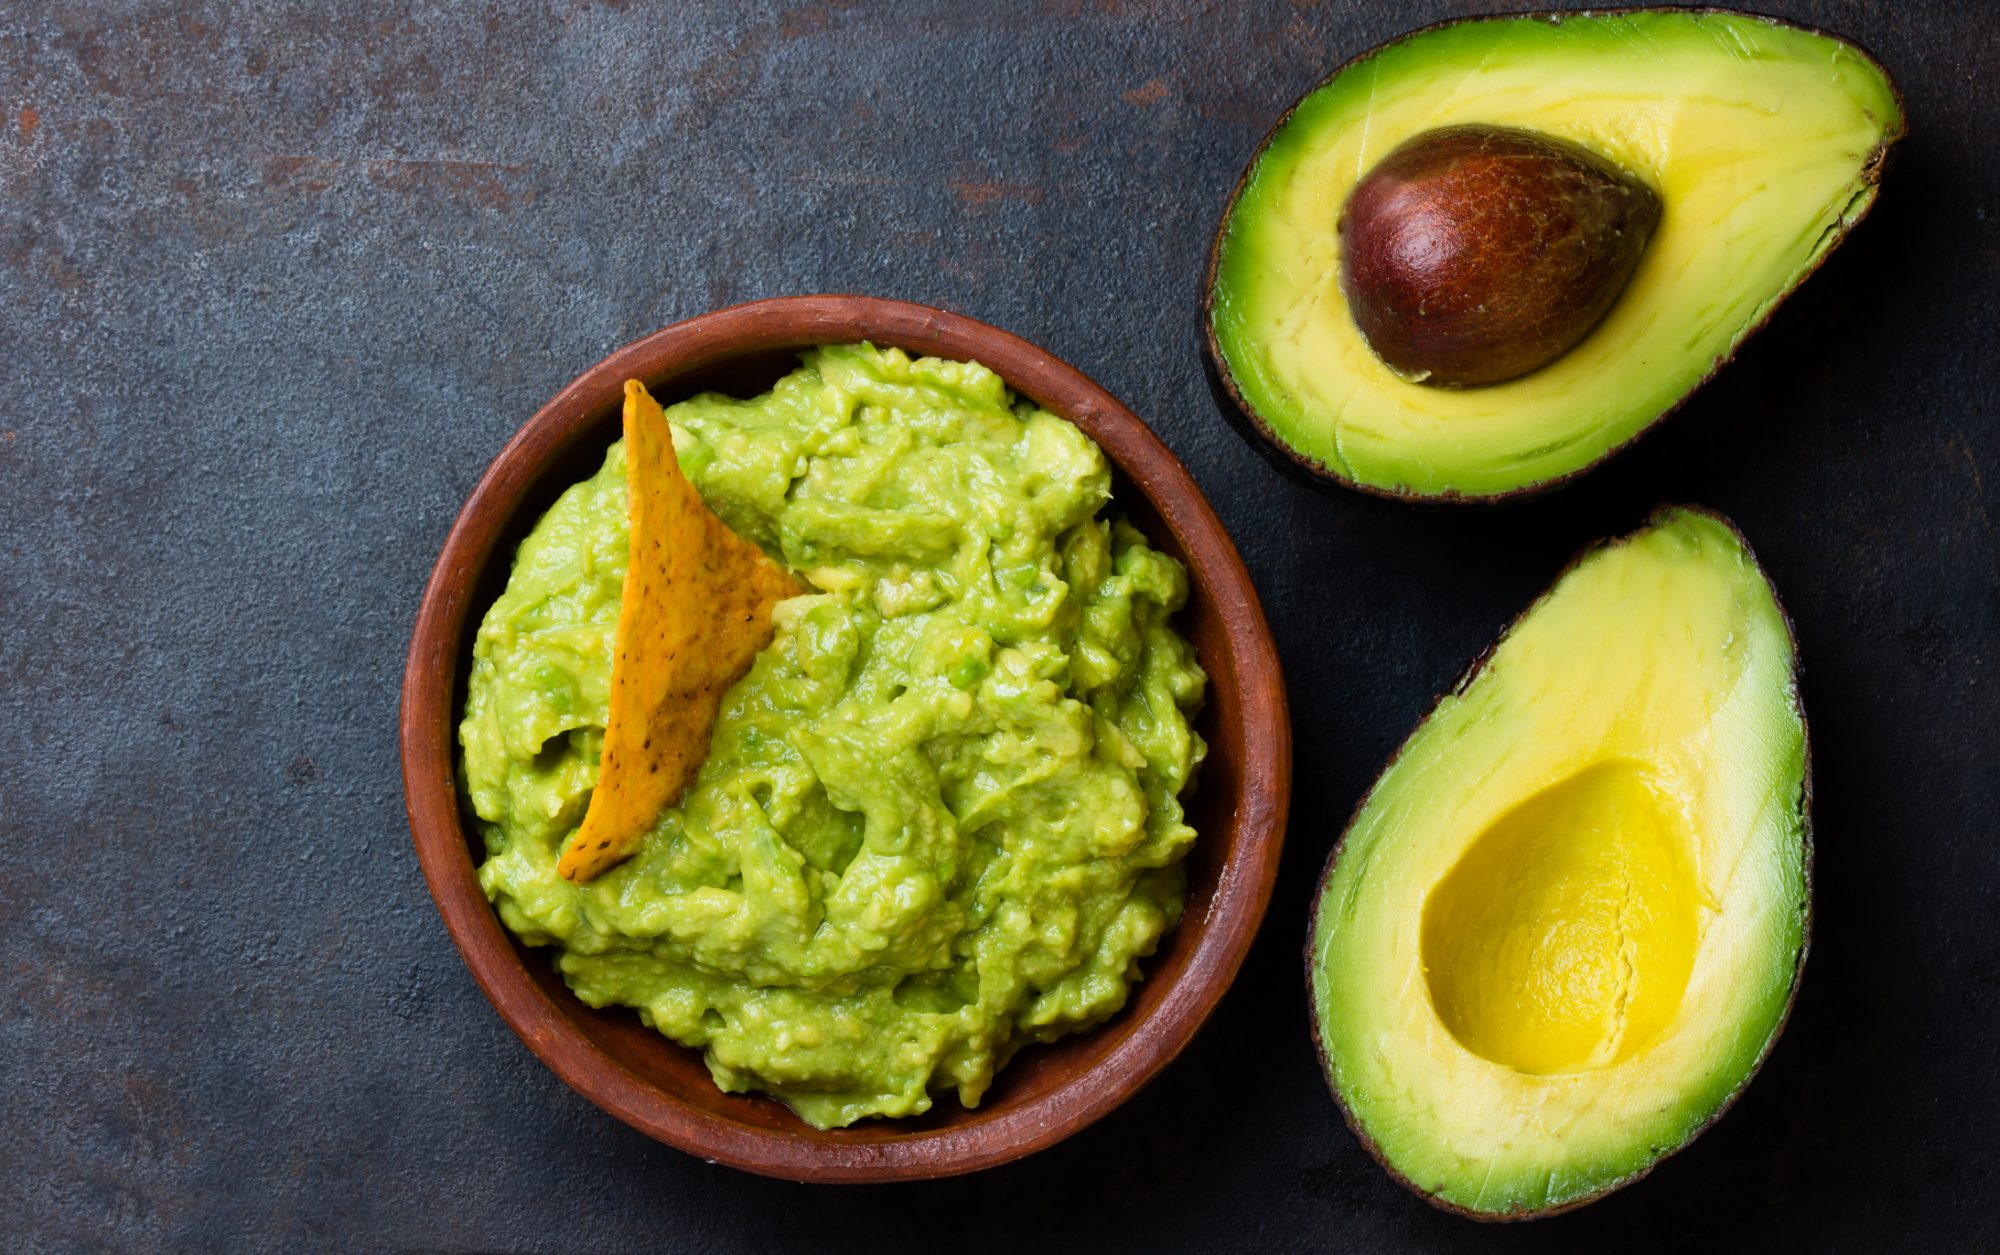 We Tried 7 Guacamole Brands and This Was Our Favorite | MyRecipes